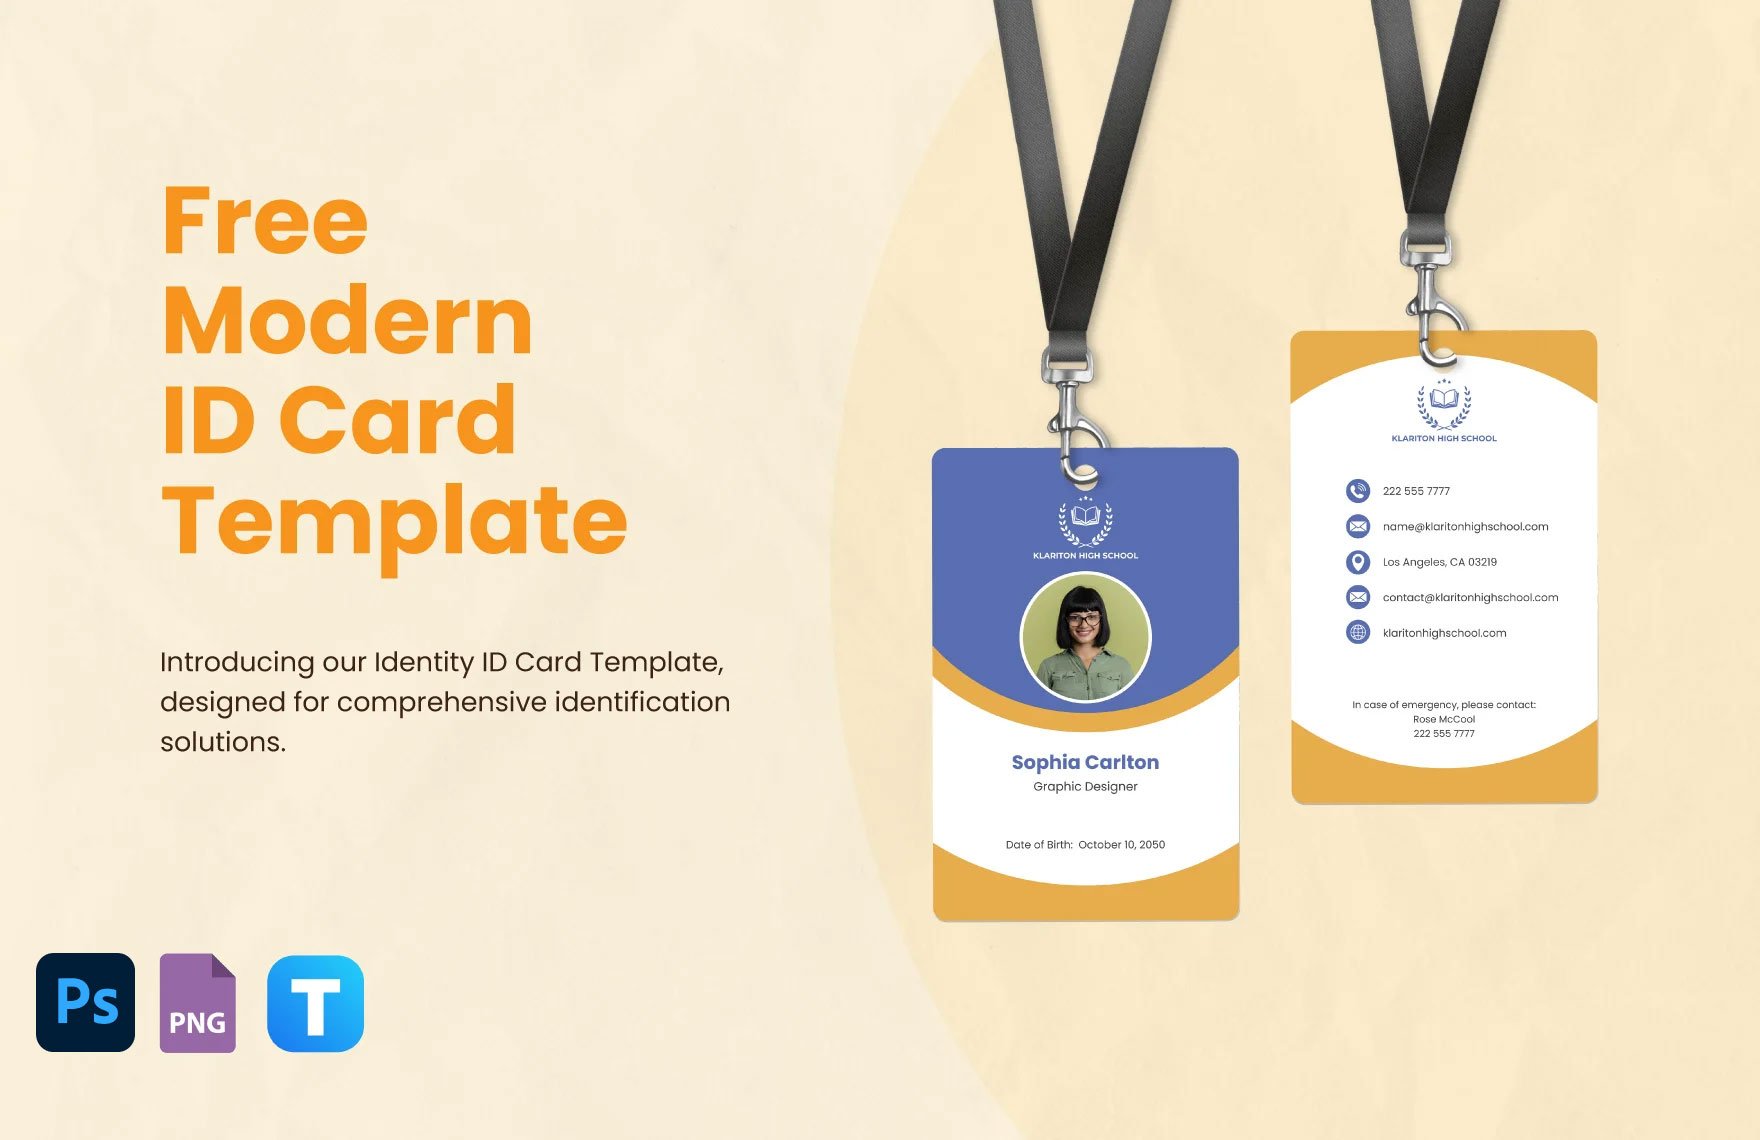 Free Modern ID Card Template in PSD, PNG